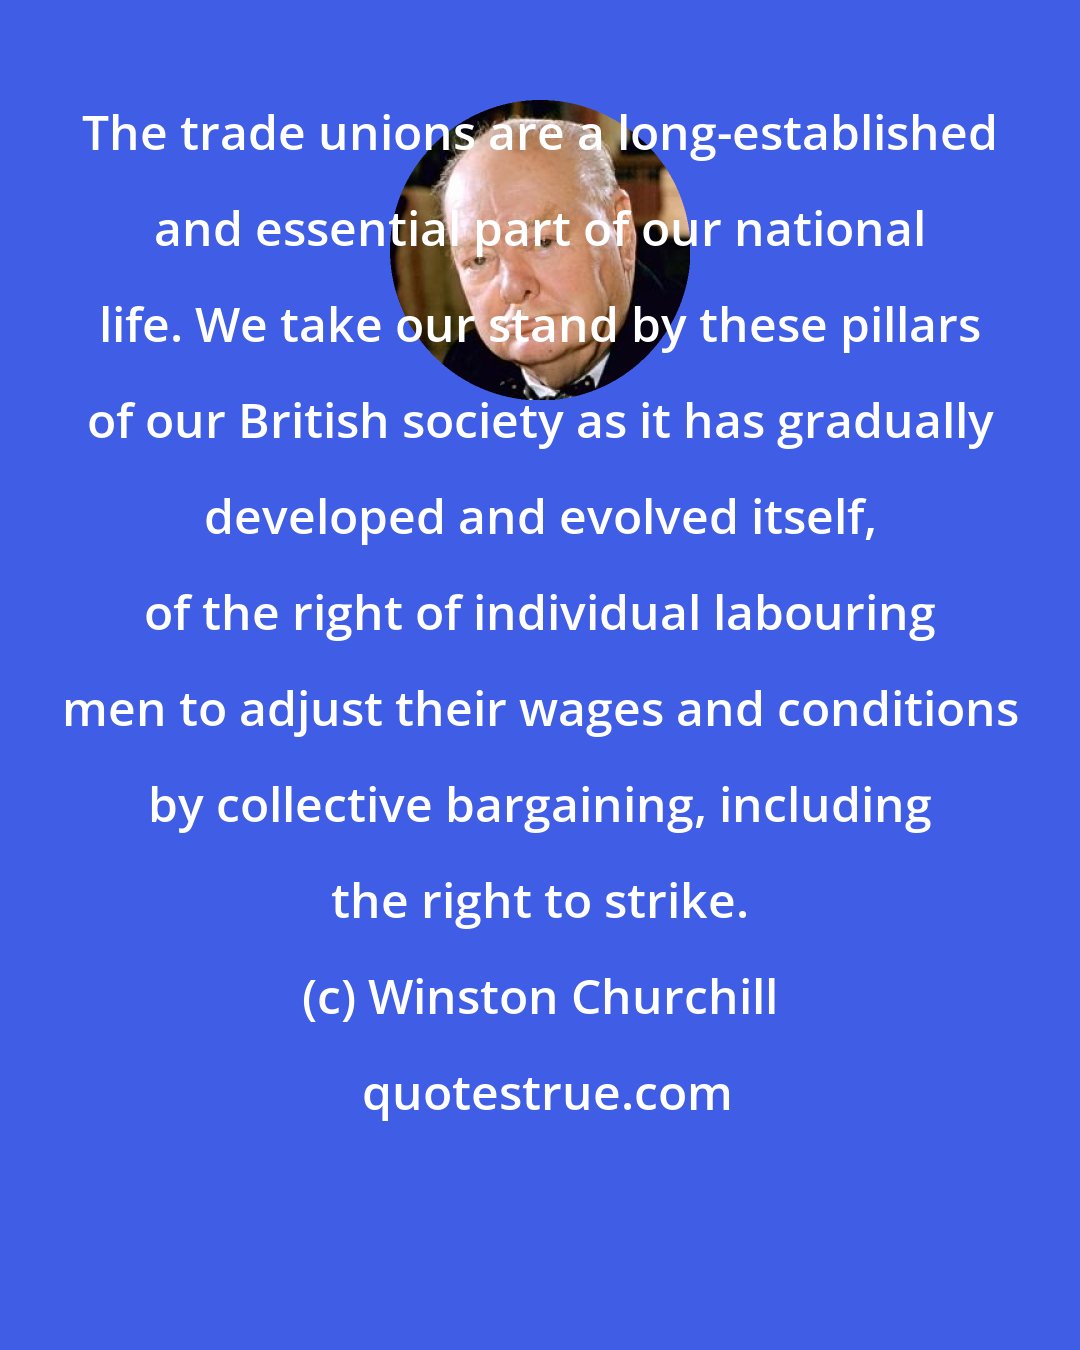 Winston Churchill: The trade unions are a long-established and essential part of our national life. We take our stand by these pillars of our British society as it has gradually developed and evolved itself, of the right of individual labouring men to adjust their wages and conditions by collective bargaining, including the right to strike.